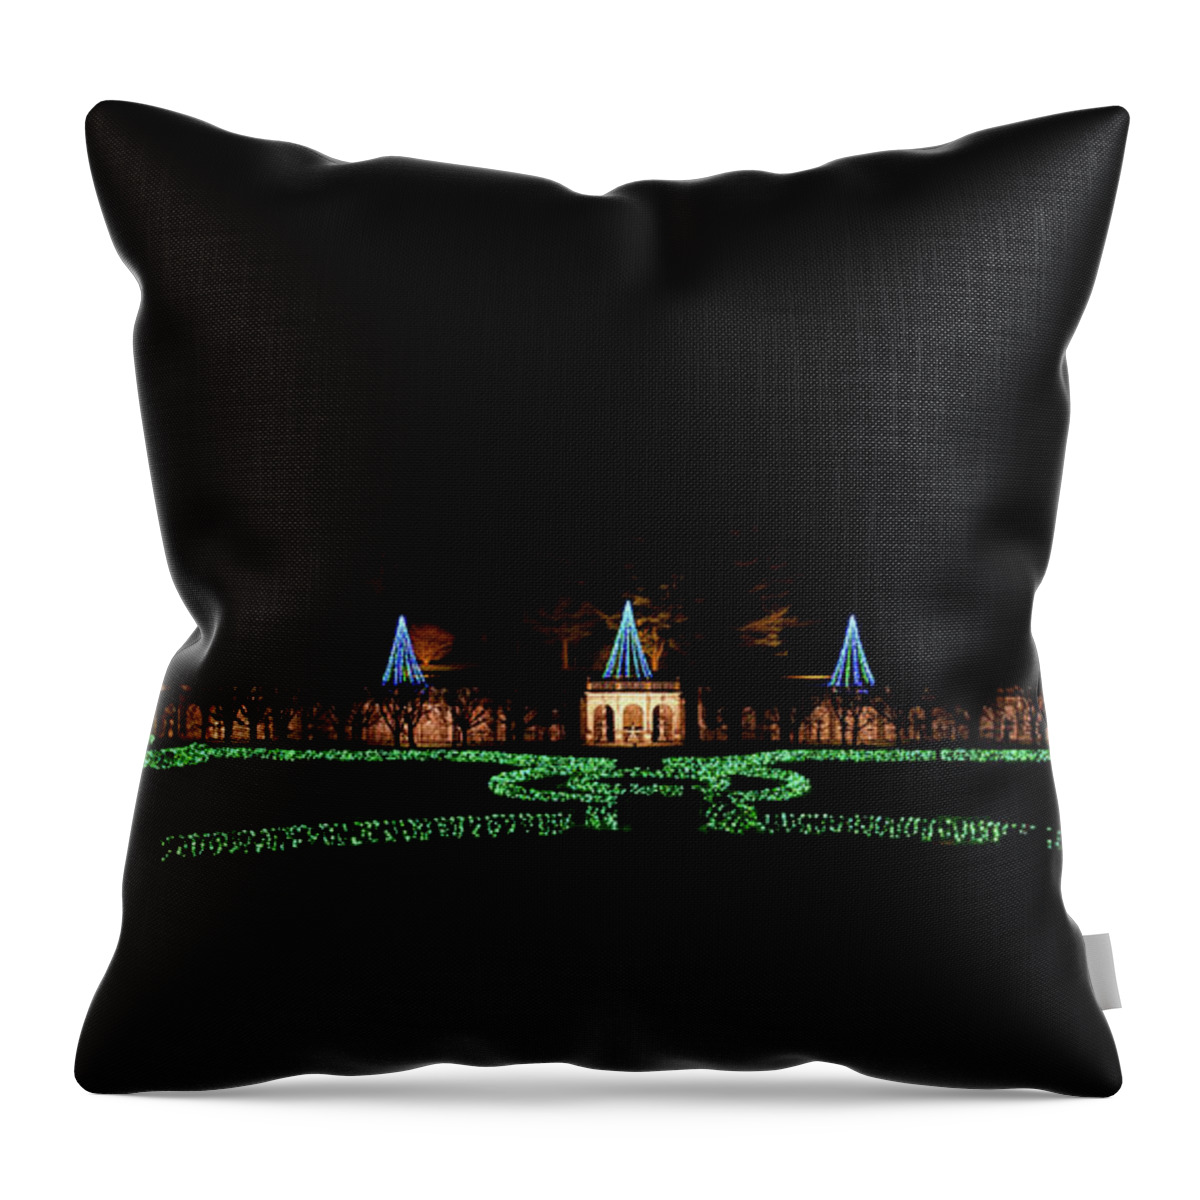 Christmas Tree Throw Pillow featuring the photograph Christmas Tree Lights by Louis Dallara